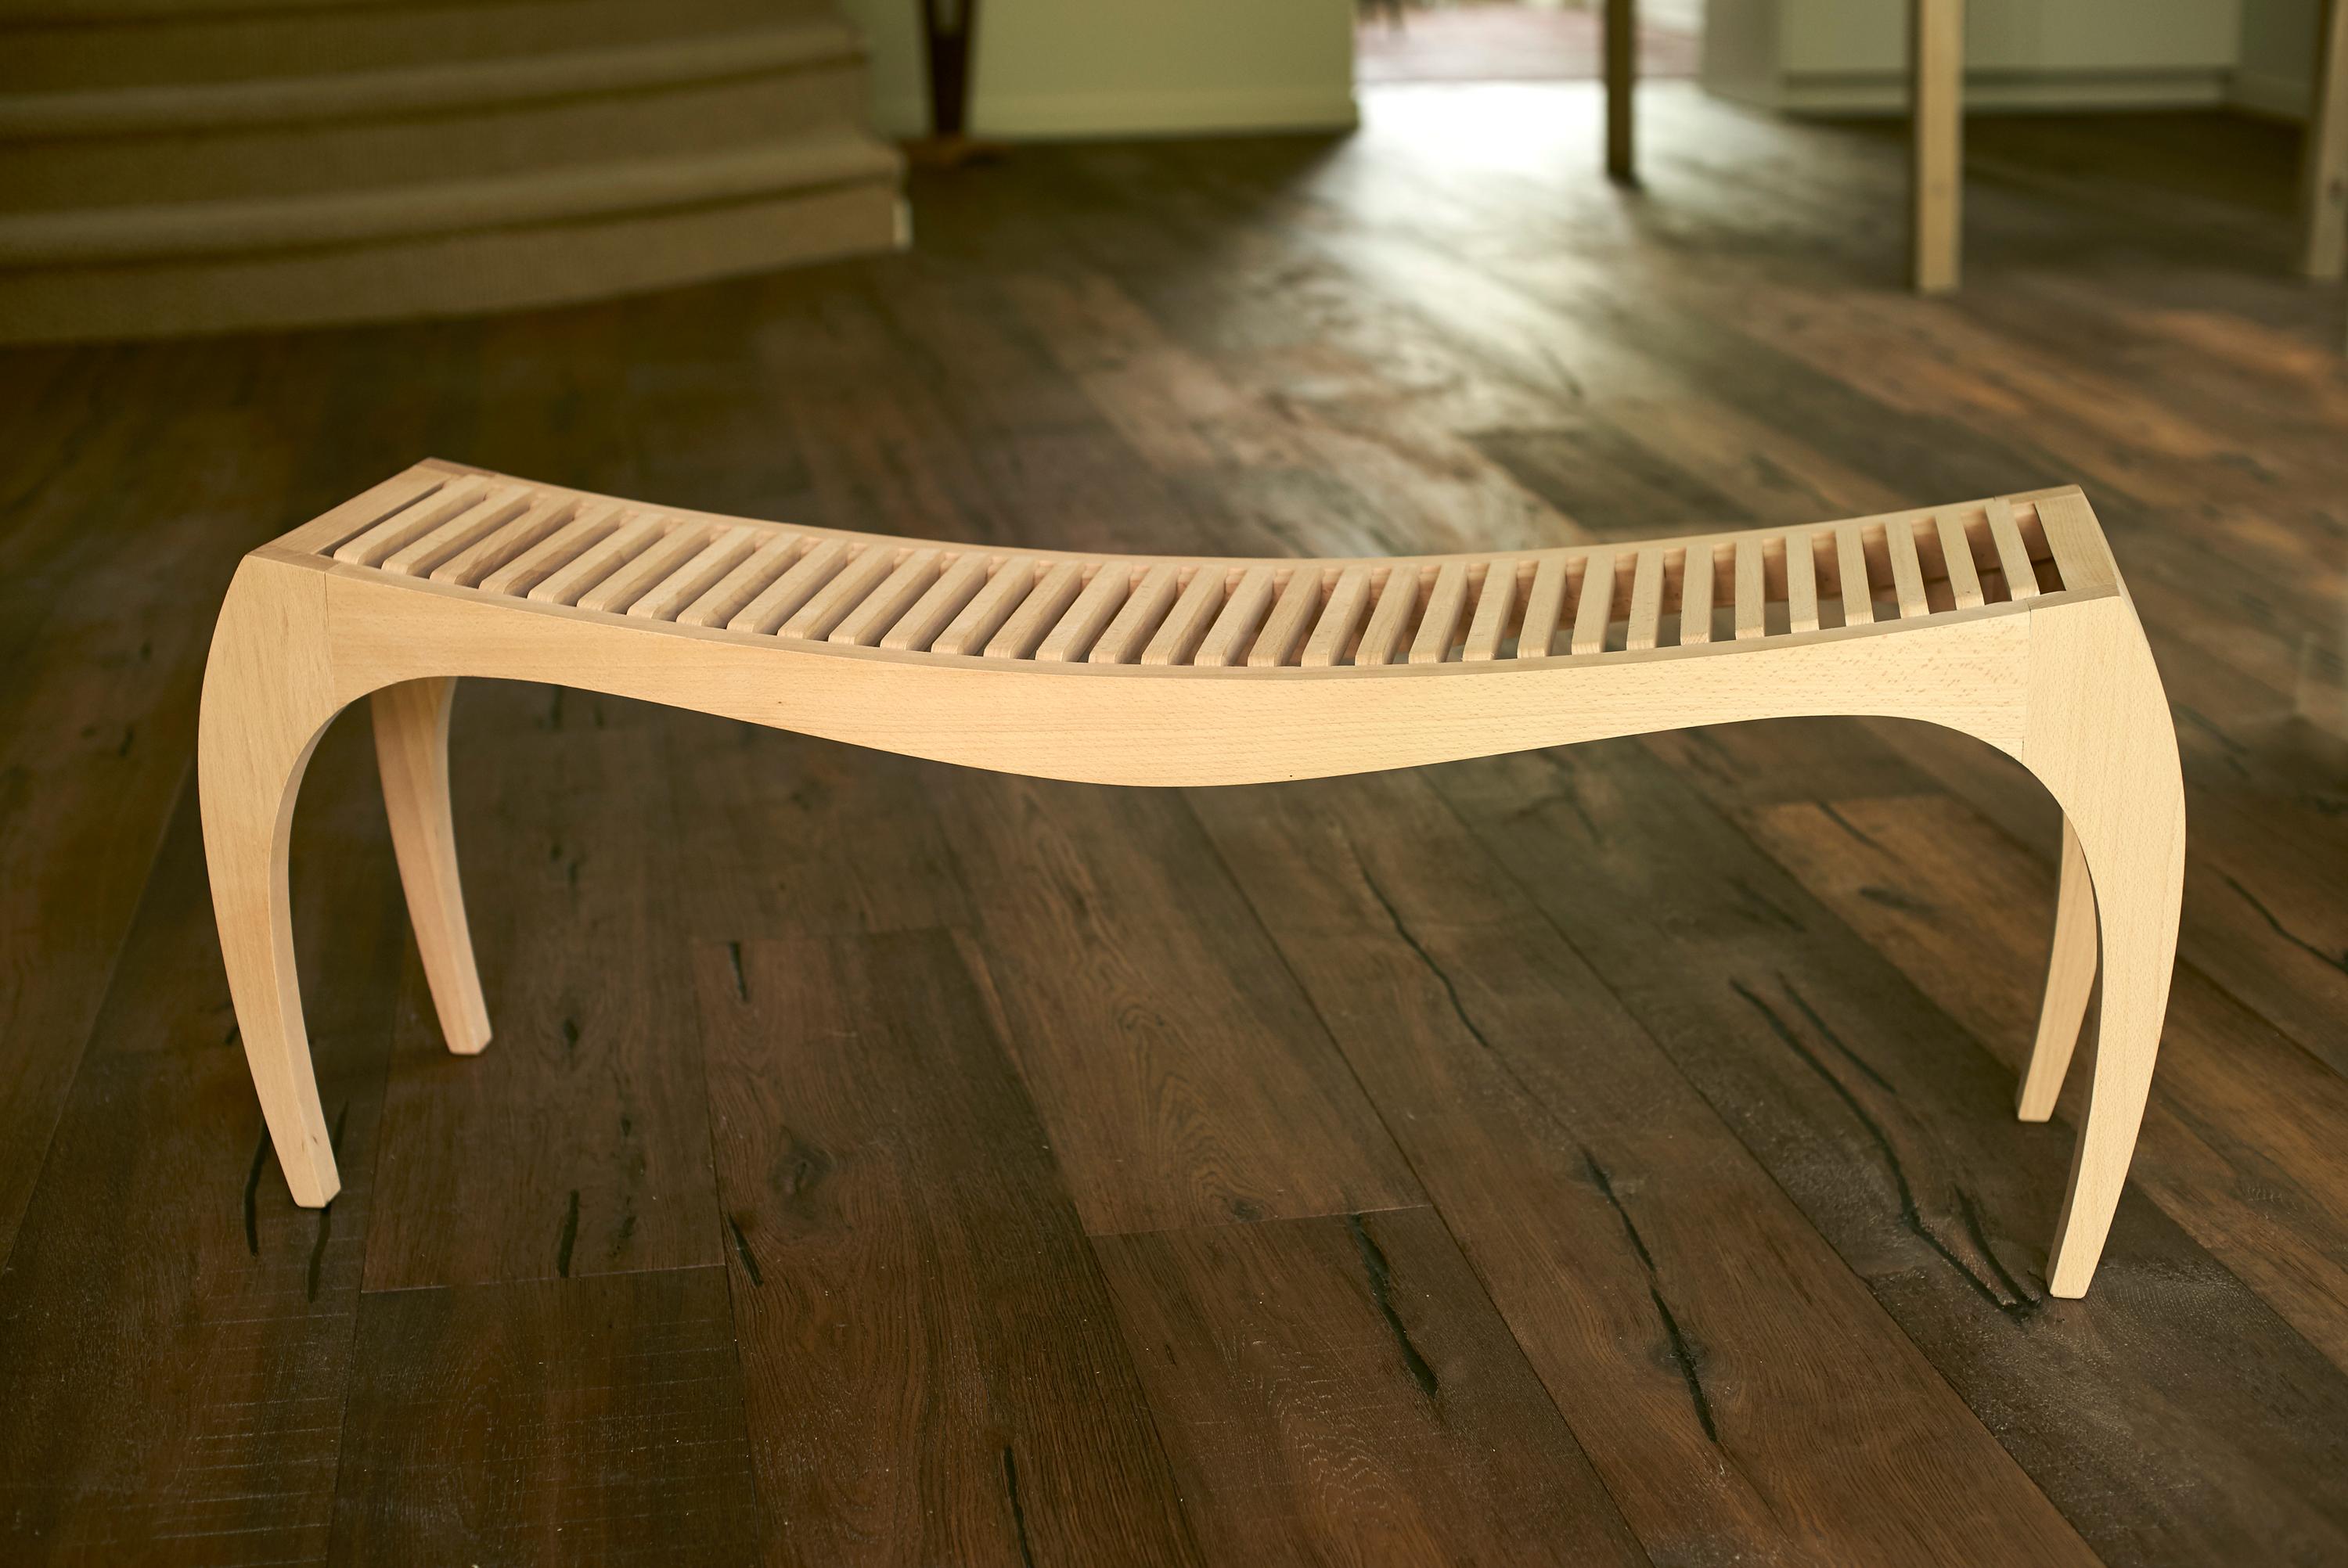 Rumbo bench by Jean-Baptiste Van den Heede
Unique piece
Signed and numbered
Dimensions: L 31 x W 118 x H 42 cm
Materials: Mapple wood

Also available in solid cherrywood and other woods on demand.

The Rumbo bench is a unique design, limited series